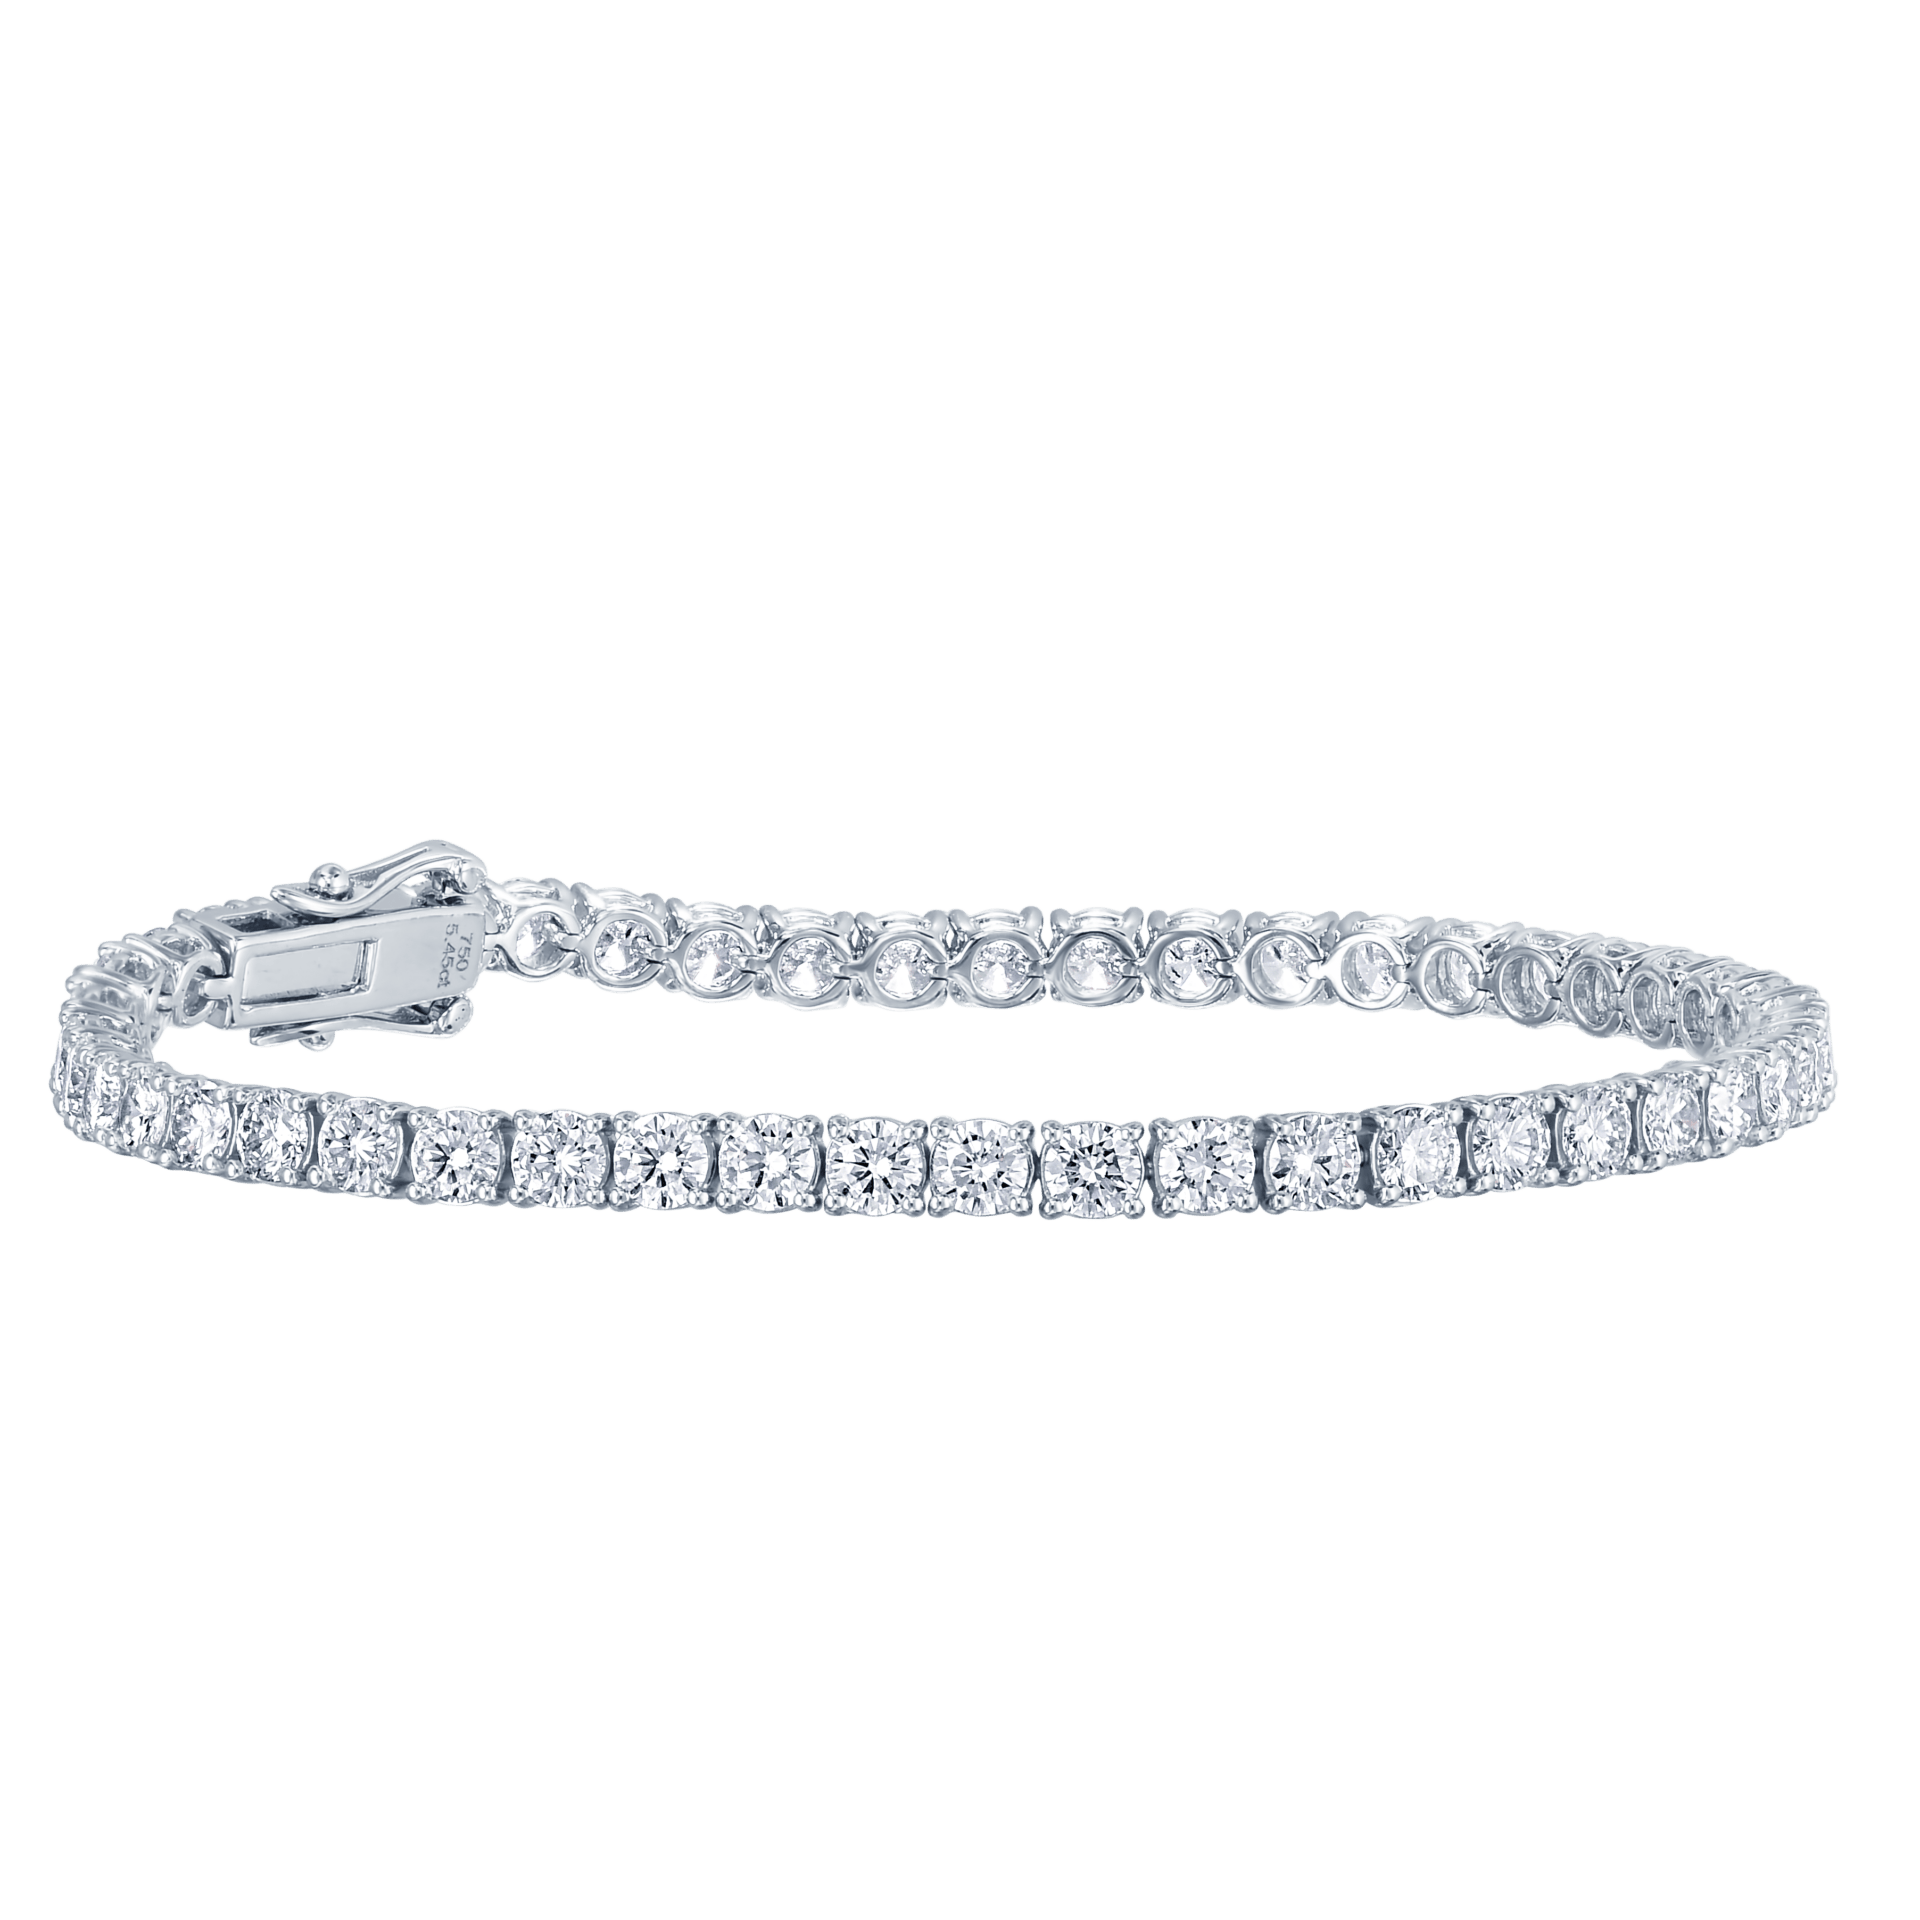 0.02 cts each Square Prong Tennis Bracelet | Everbrite Jewellery